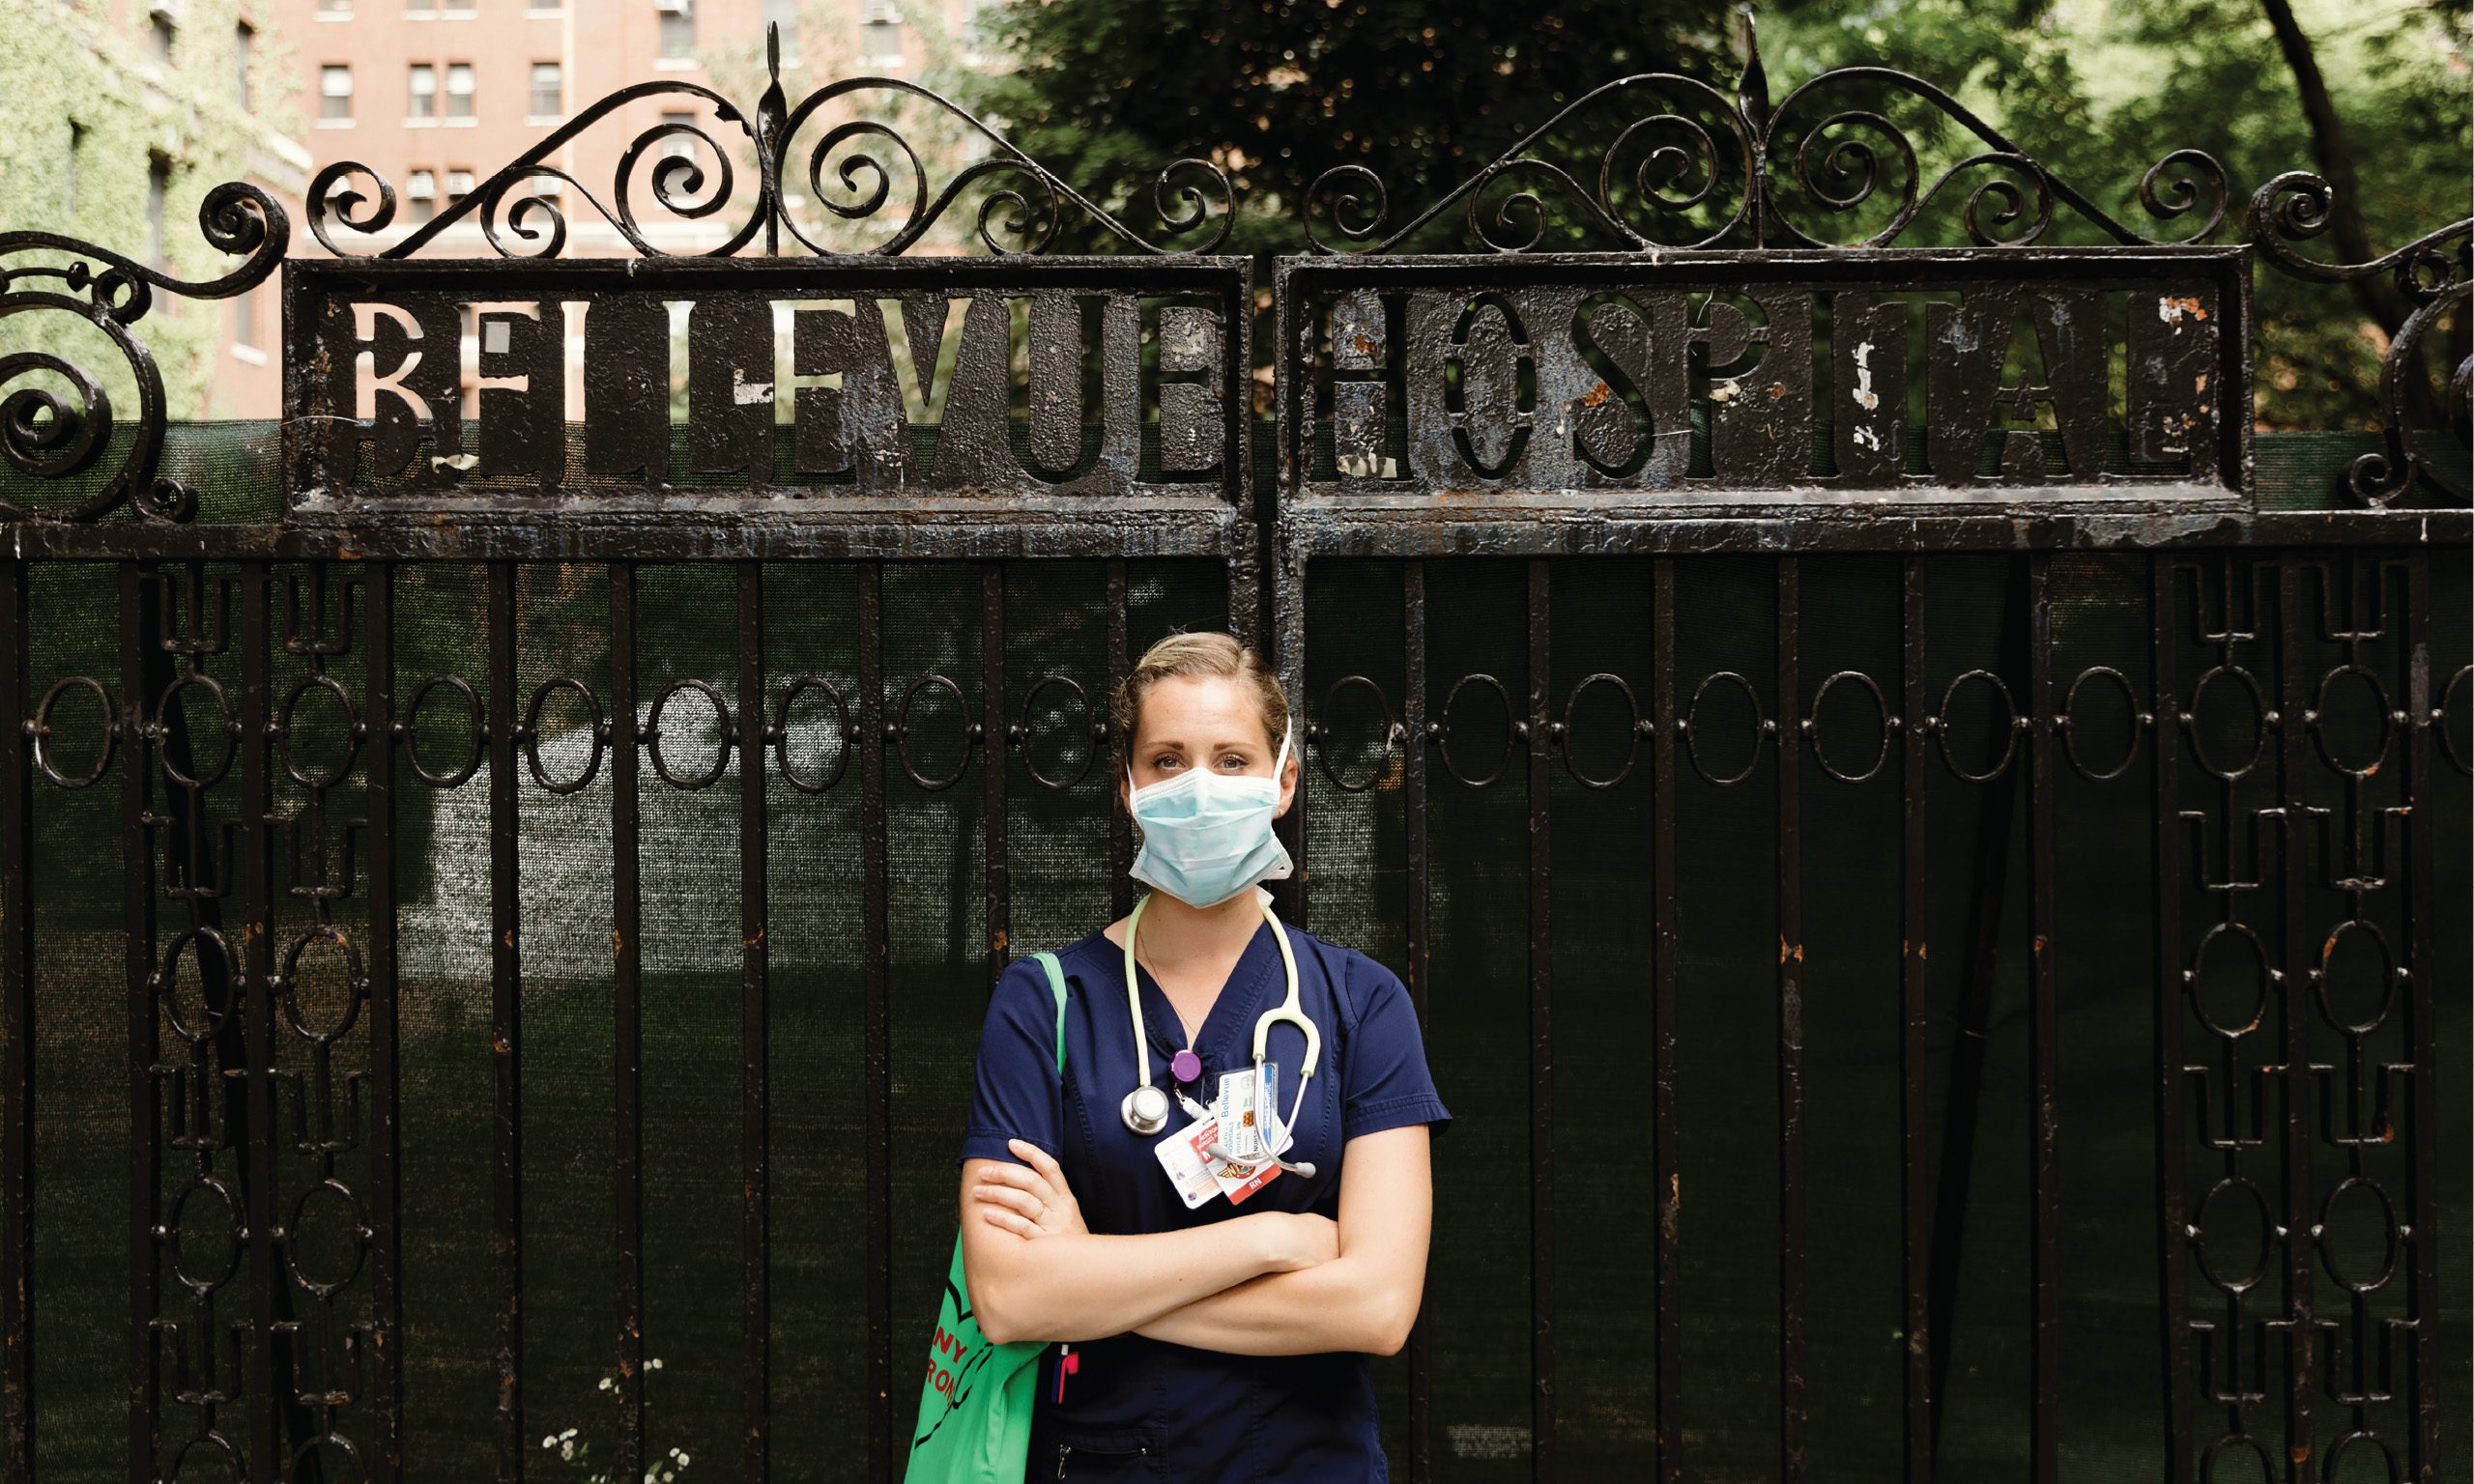 Channing Voyles stands with arms crossed in scrubs and a surgical mask outside the gates of Bellevue Hospital.